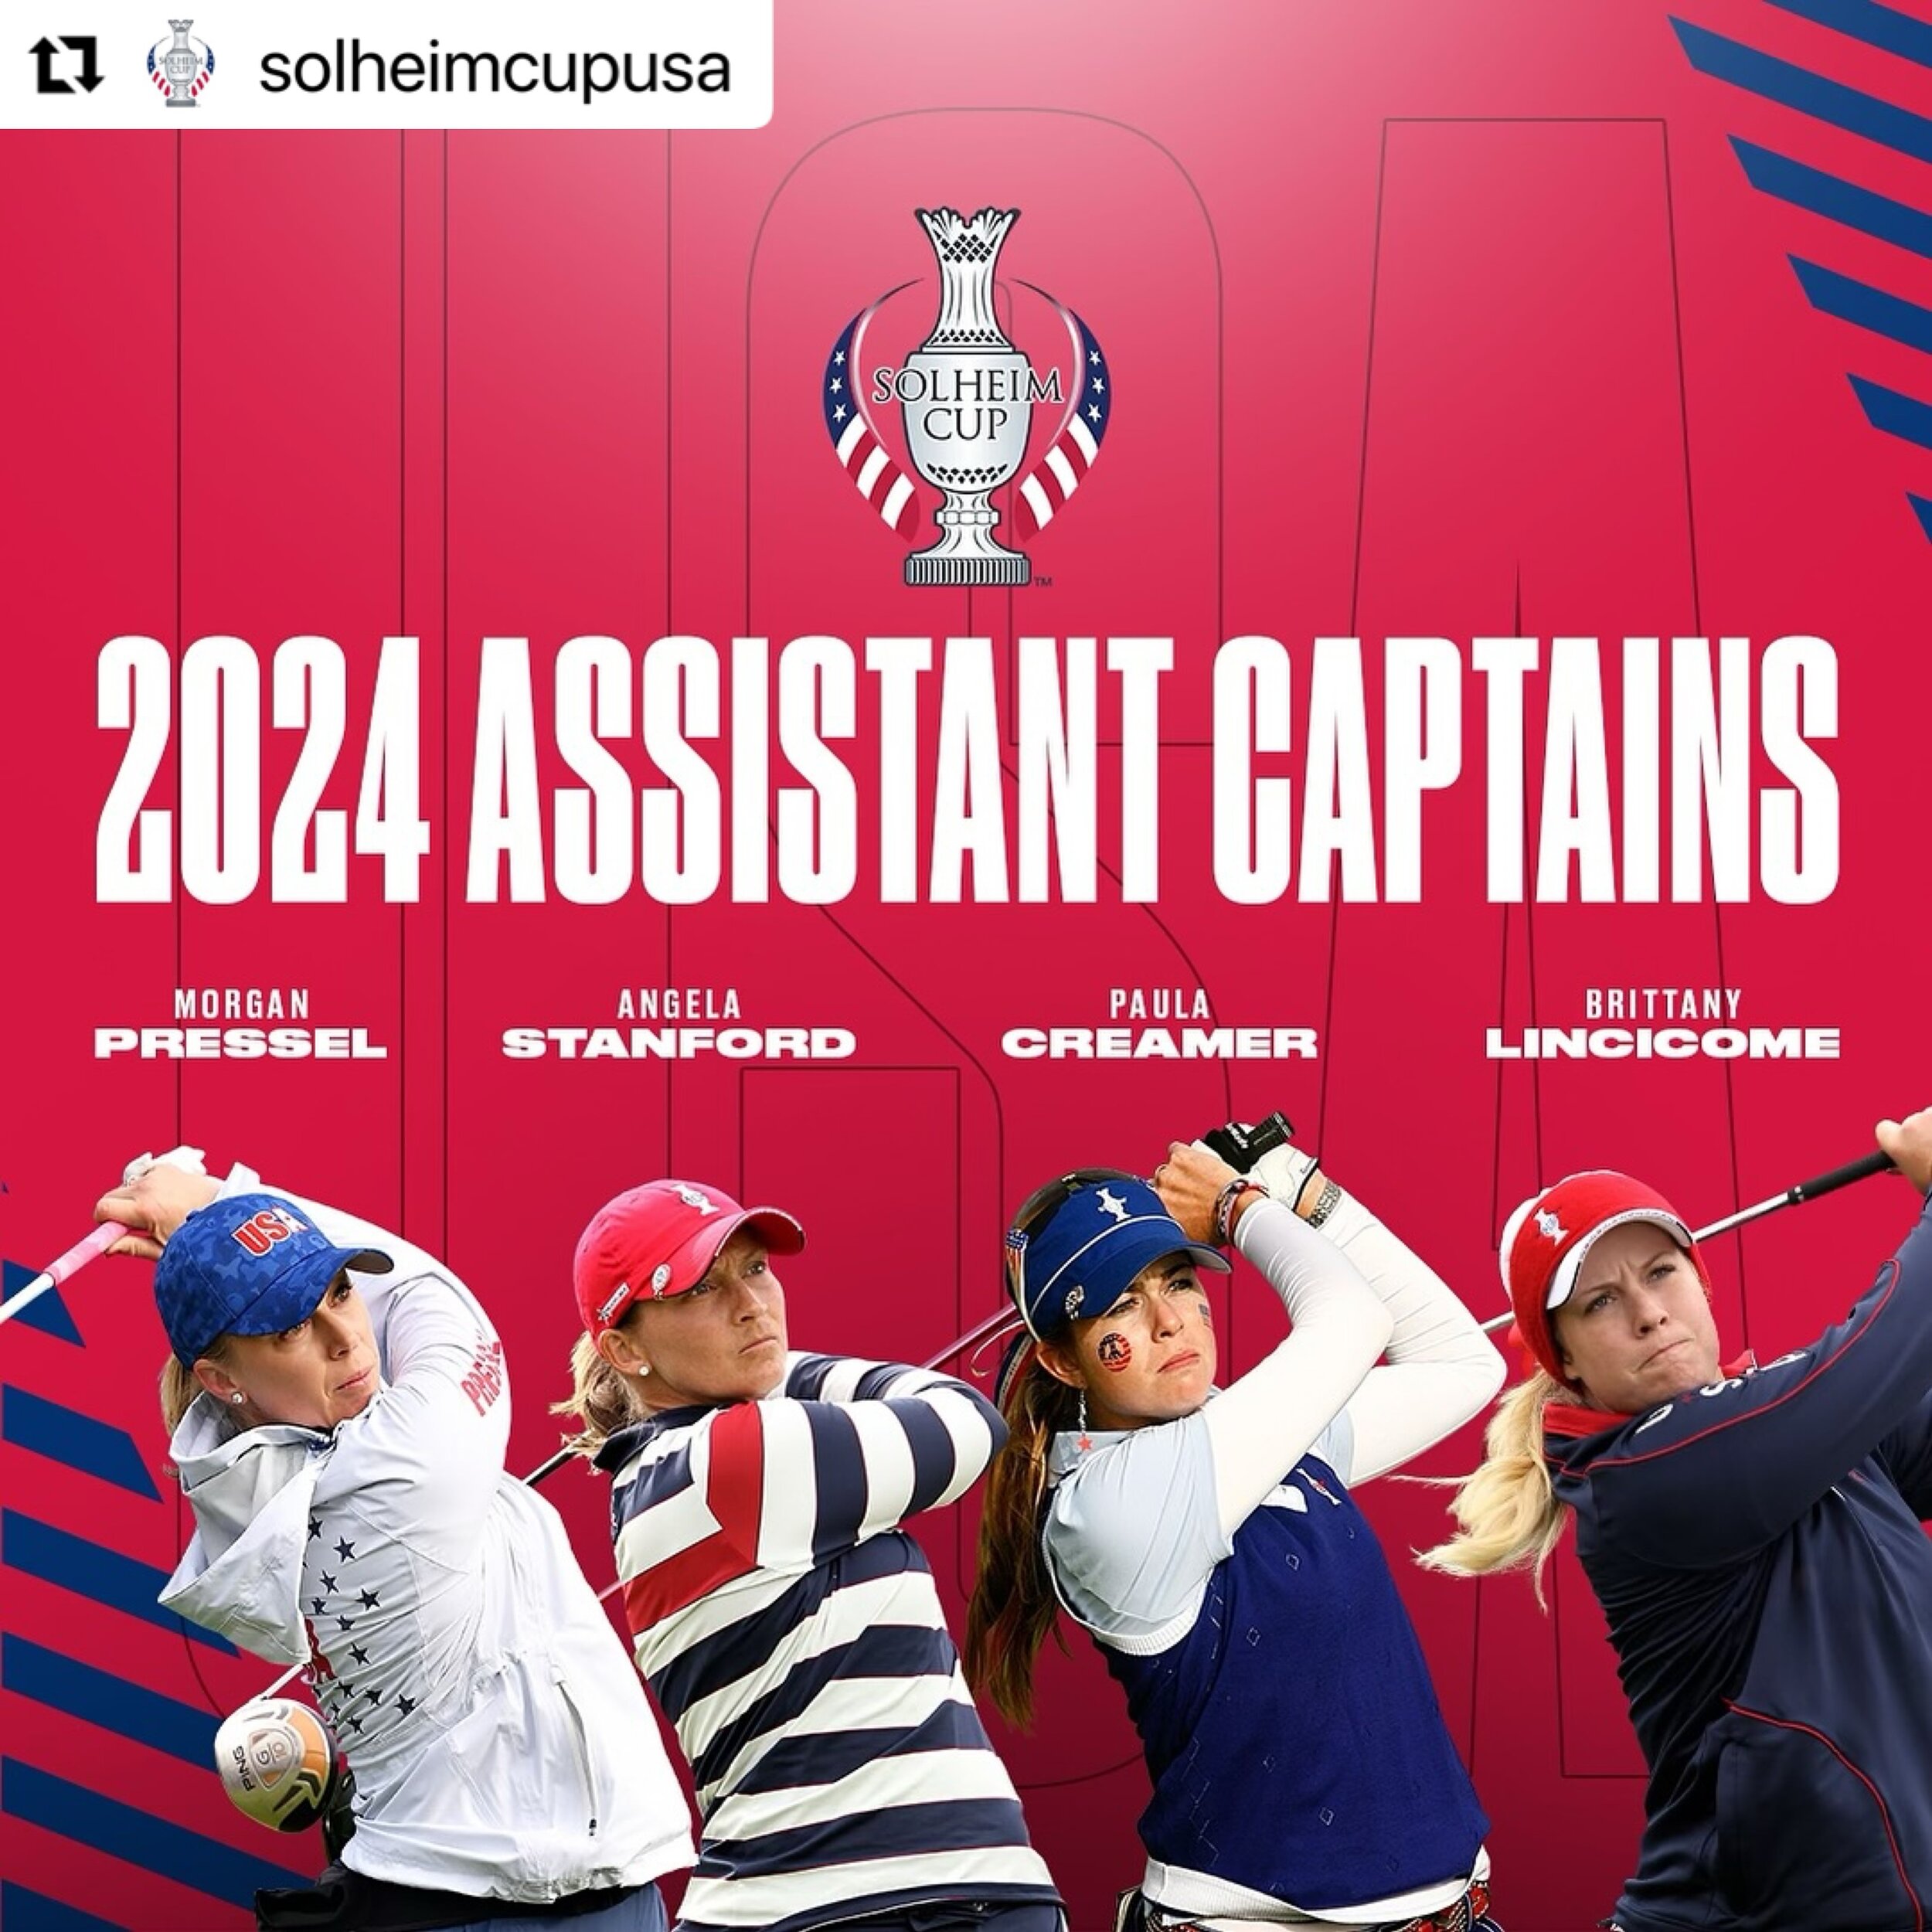 Congratulations to @brittany1golf for being selected as an Assistant Captain for Team USA in the 2024 Solheim Cup! 🇺🇸